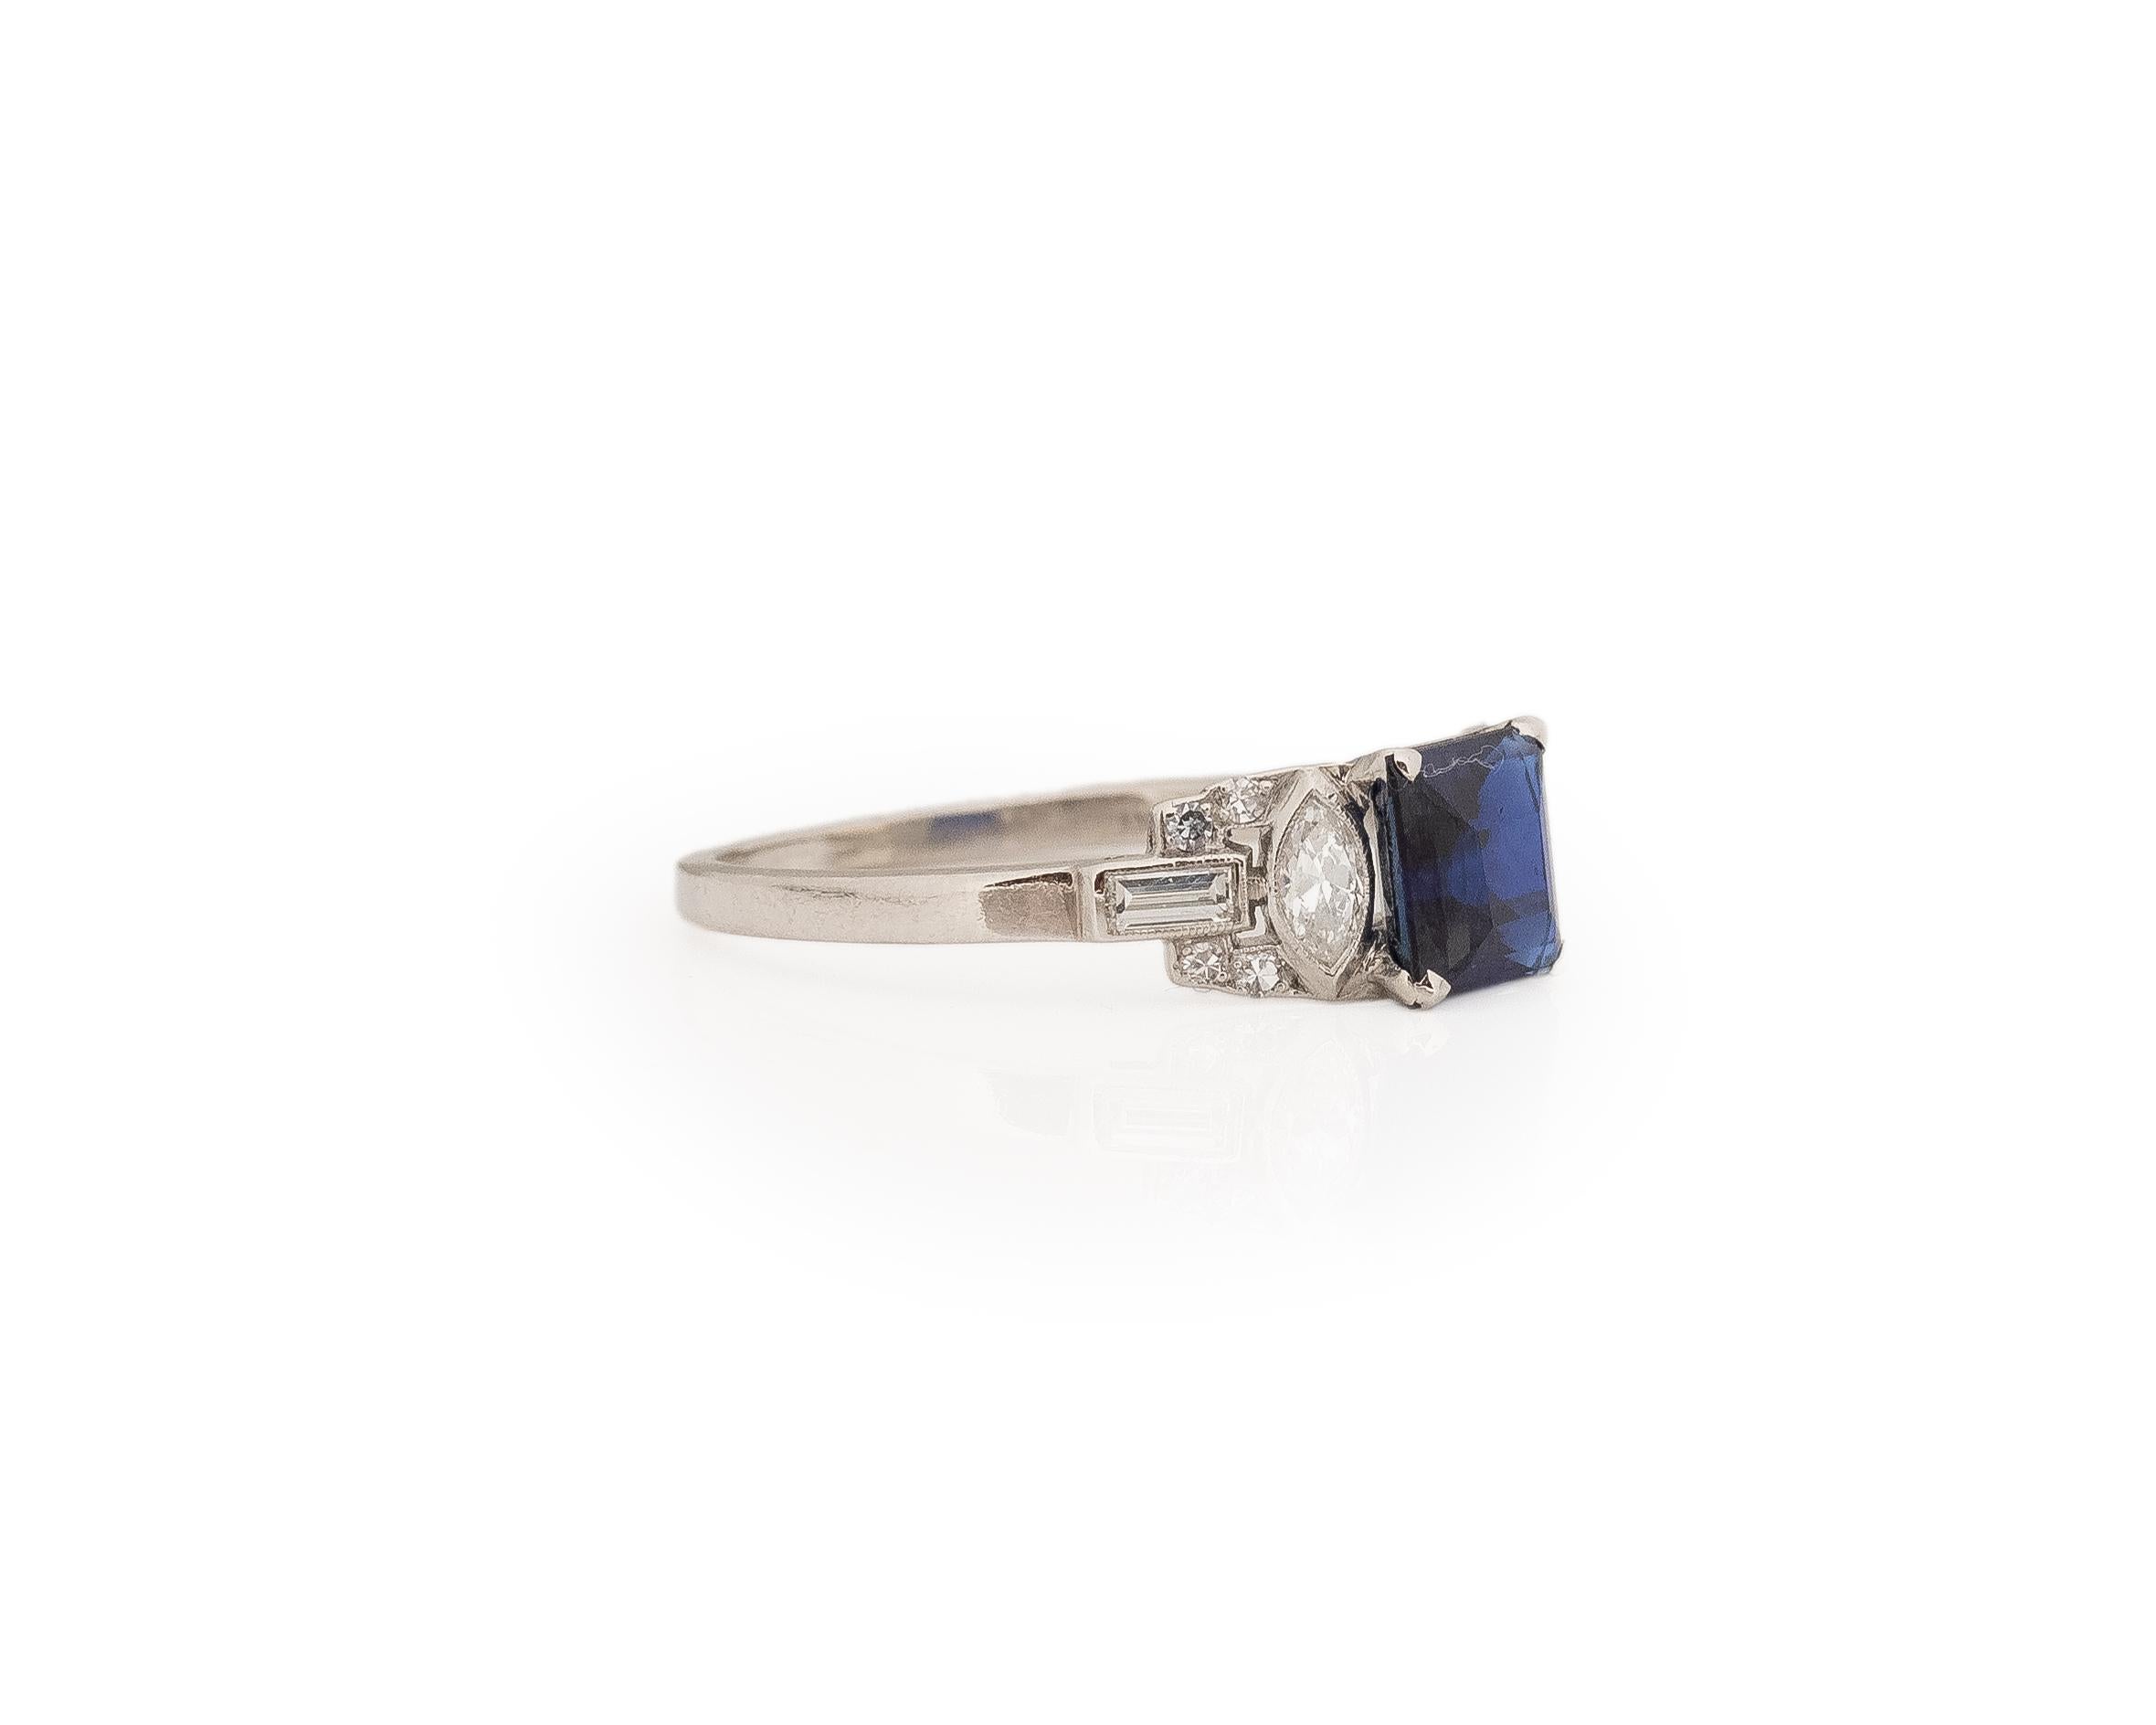 Year: 1920s

Item Details:
Ring Size: 6.75
Metal Type: Platinum [Hallmarked, and Tested]
Weight: 3.2 grams

Diamond Details:

GIA Report#: 2239071614
Weight: 1.57ct total weight
Cut: Square Step Cut
Color: Blue (Unheated, No Treatment)
Type: